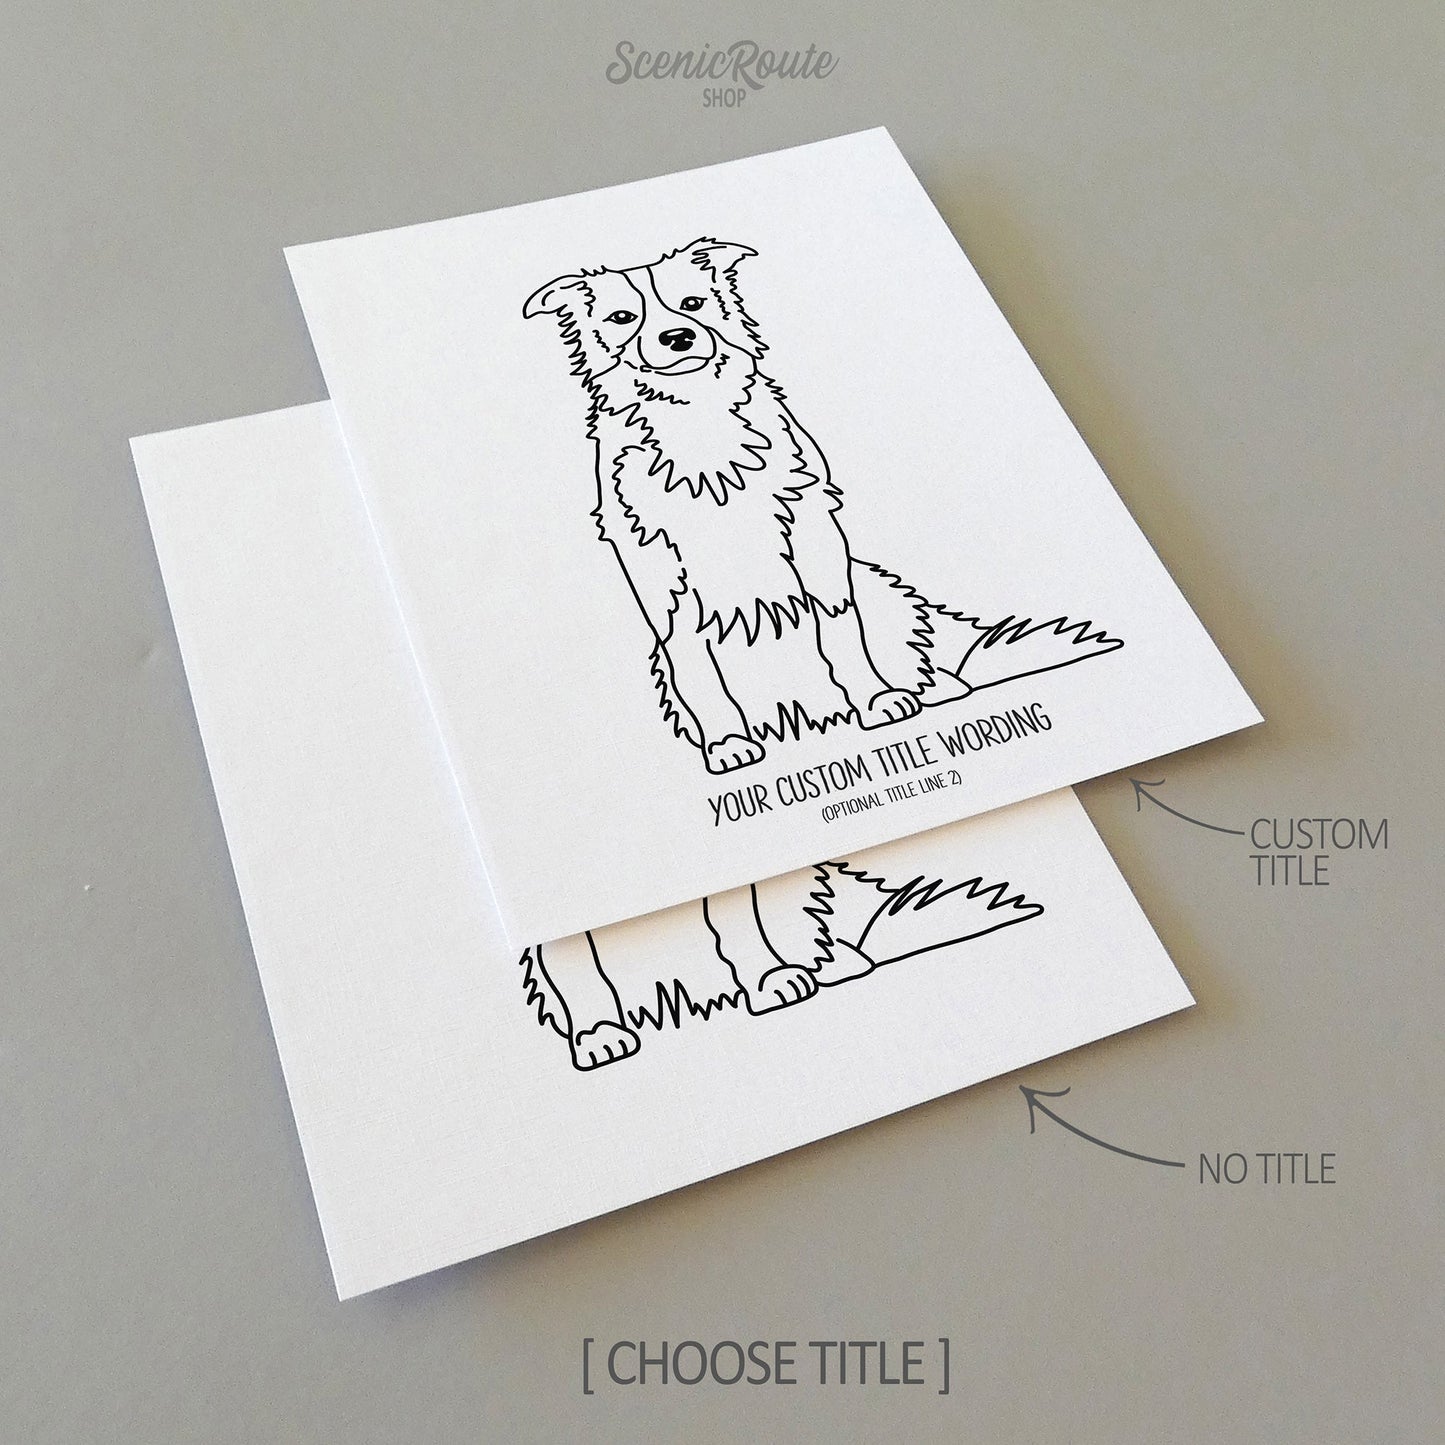 Two drawings of a Border Collie dog on white linen paper with a gray background.  Pieces are shown with “No Title” and “Custom Title” options to illustrate the available art print options.